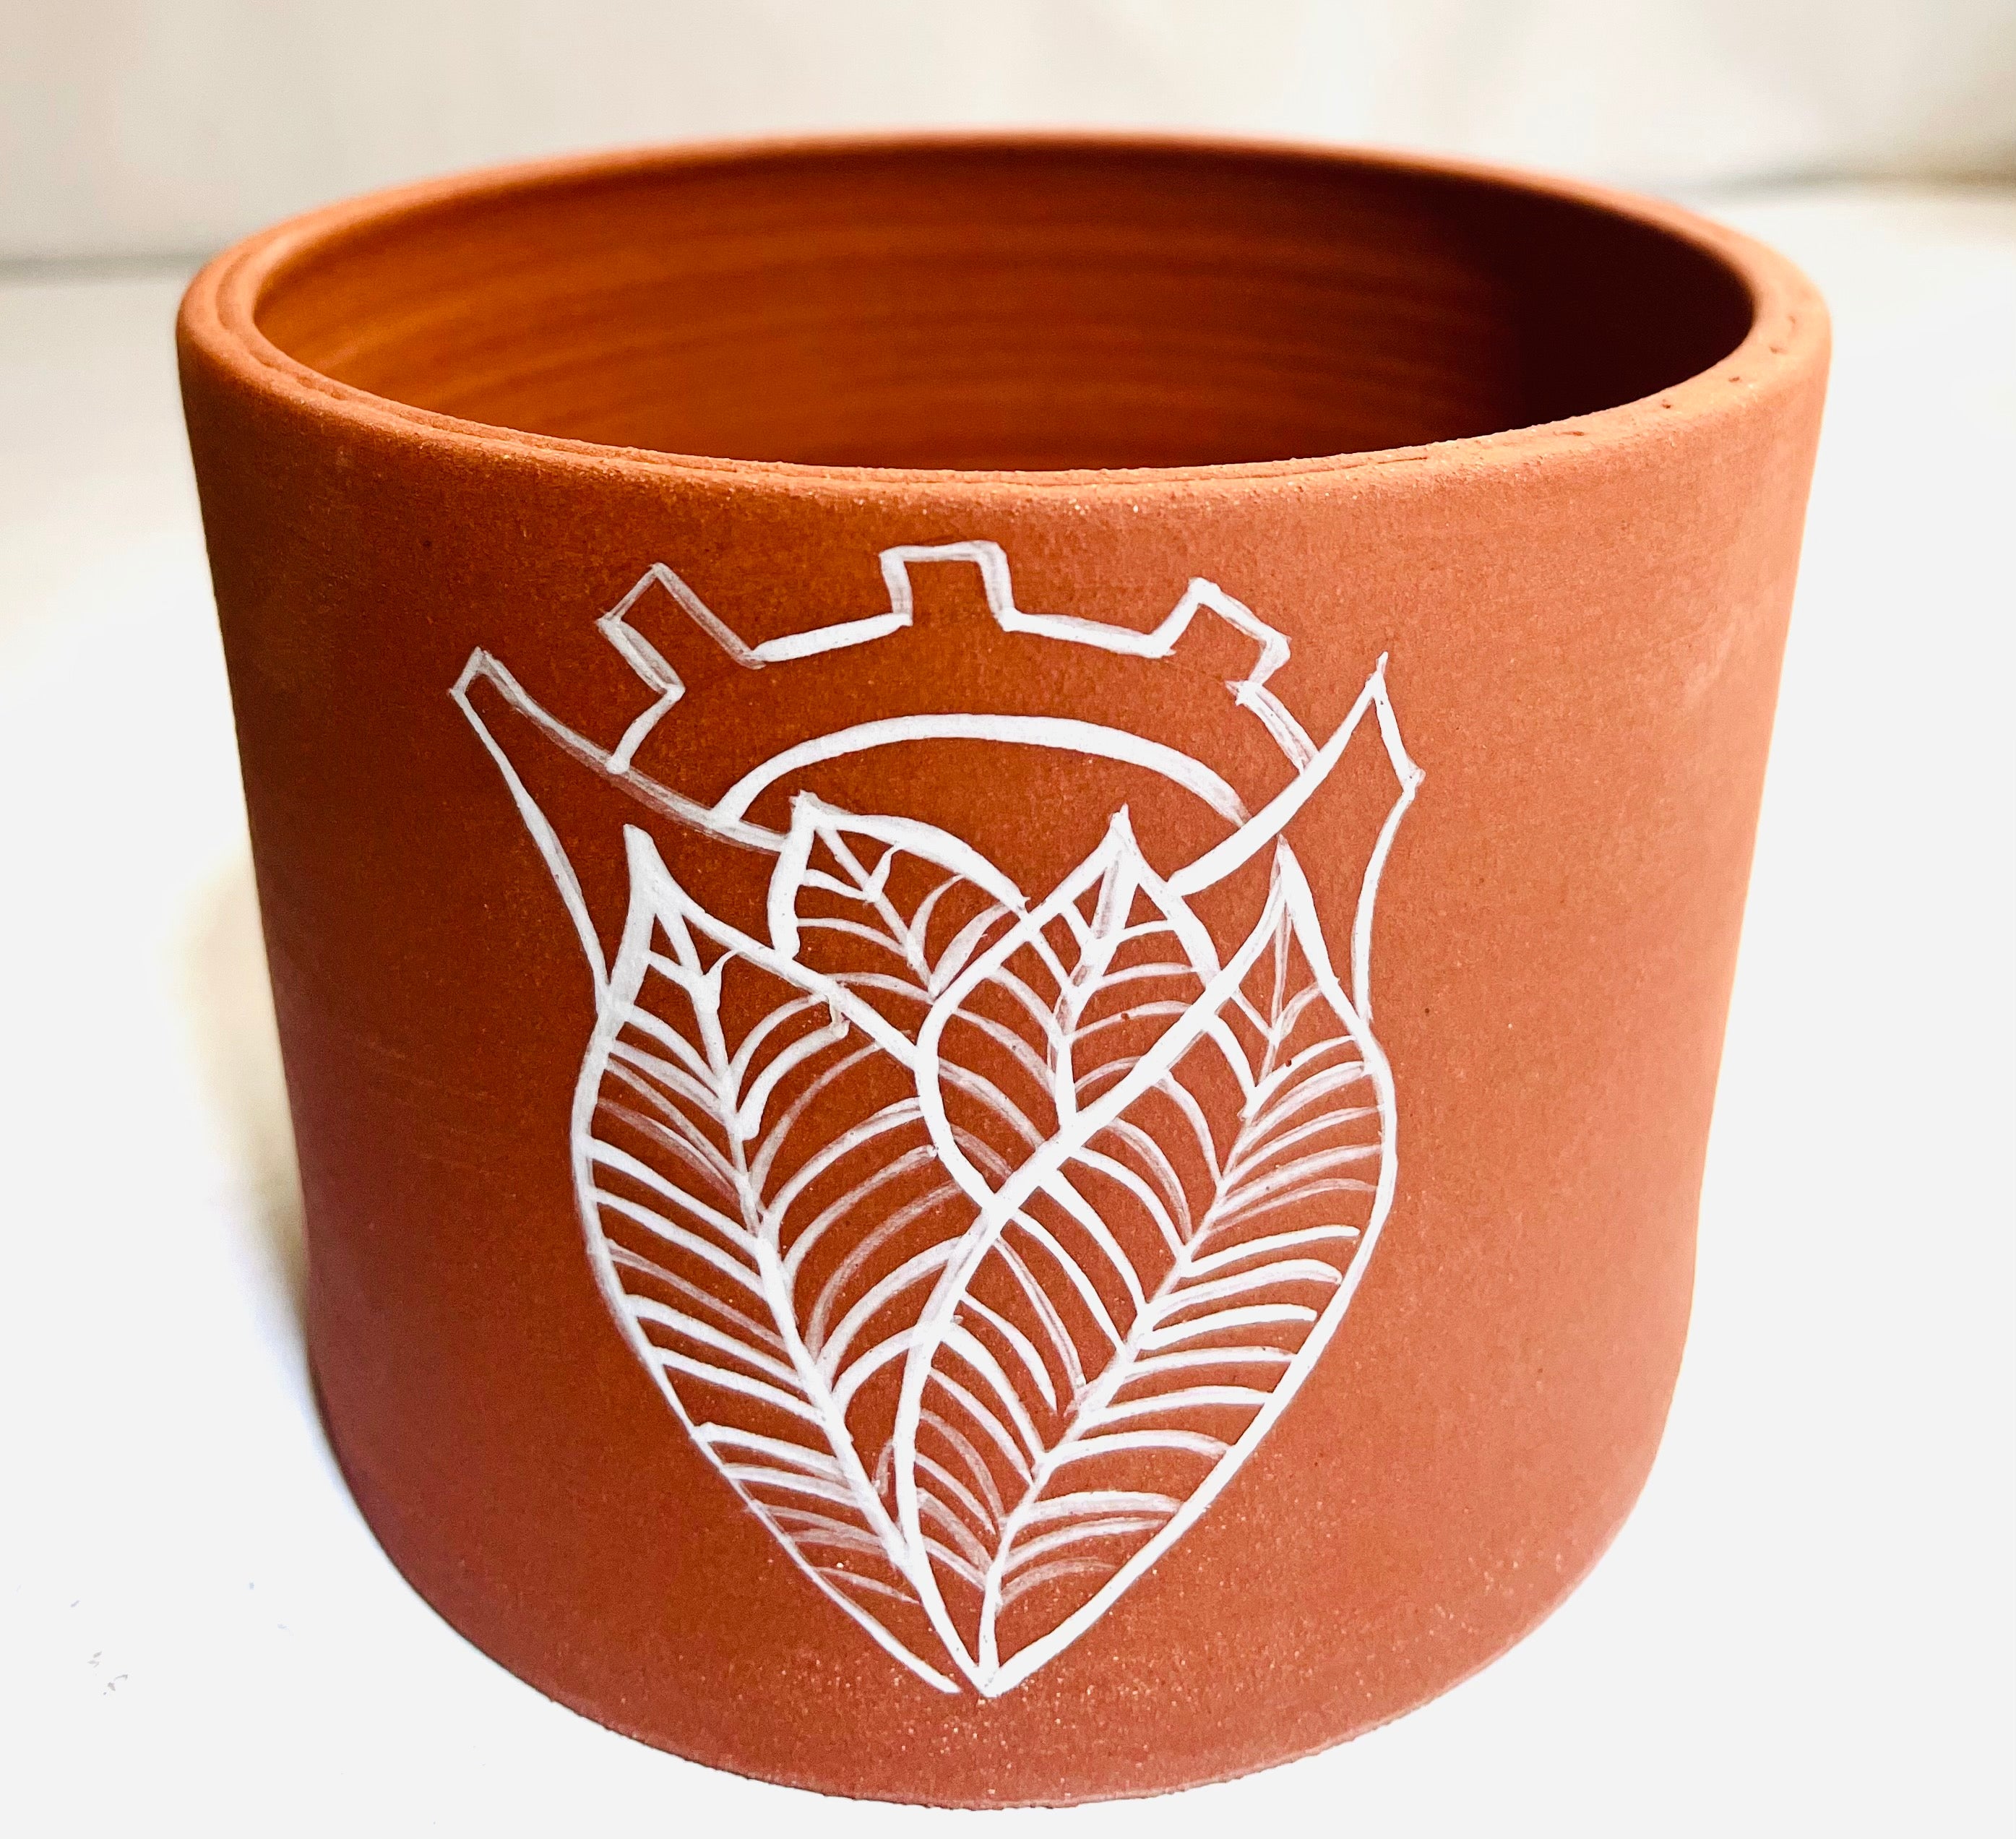 Sacred Heart Red Clay Planter: A red, unglazed cylindrical planter with a white handpainted design of an anatomical sacred heart. The heart is made of veined leaves.